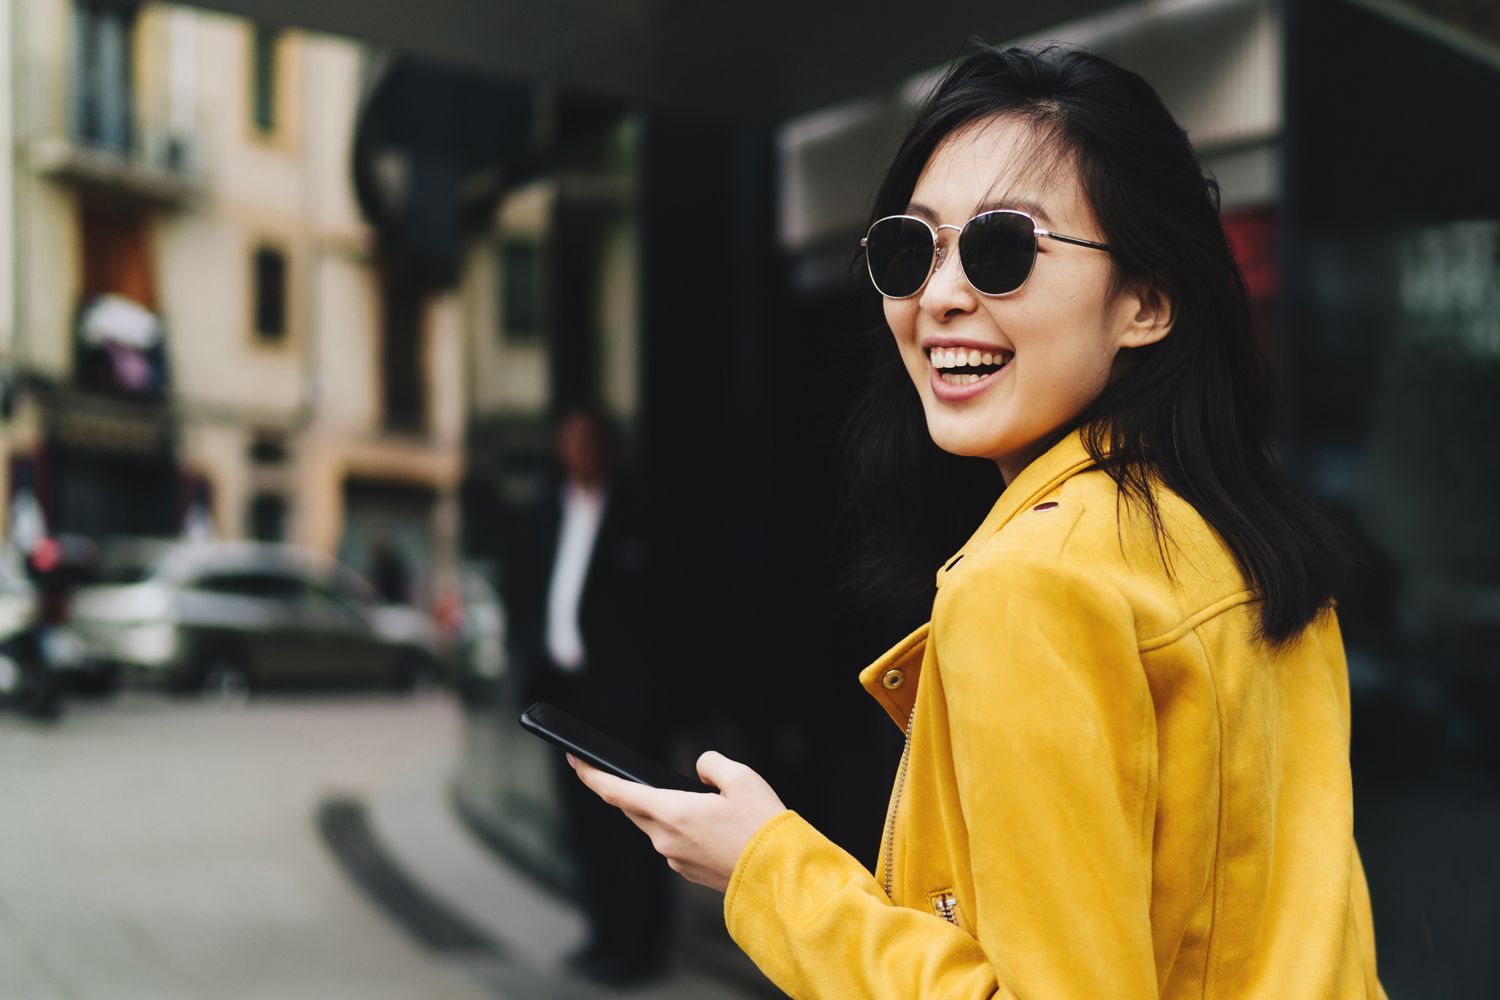 Smiling woman in yellow jacket